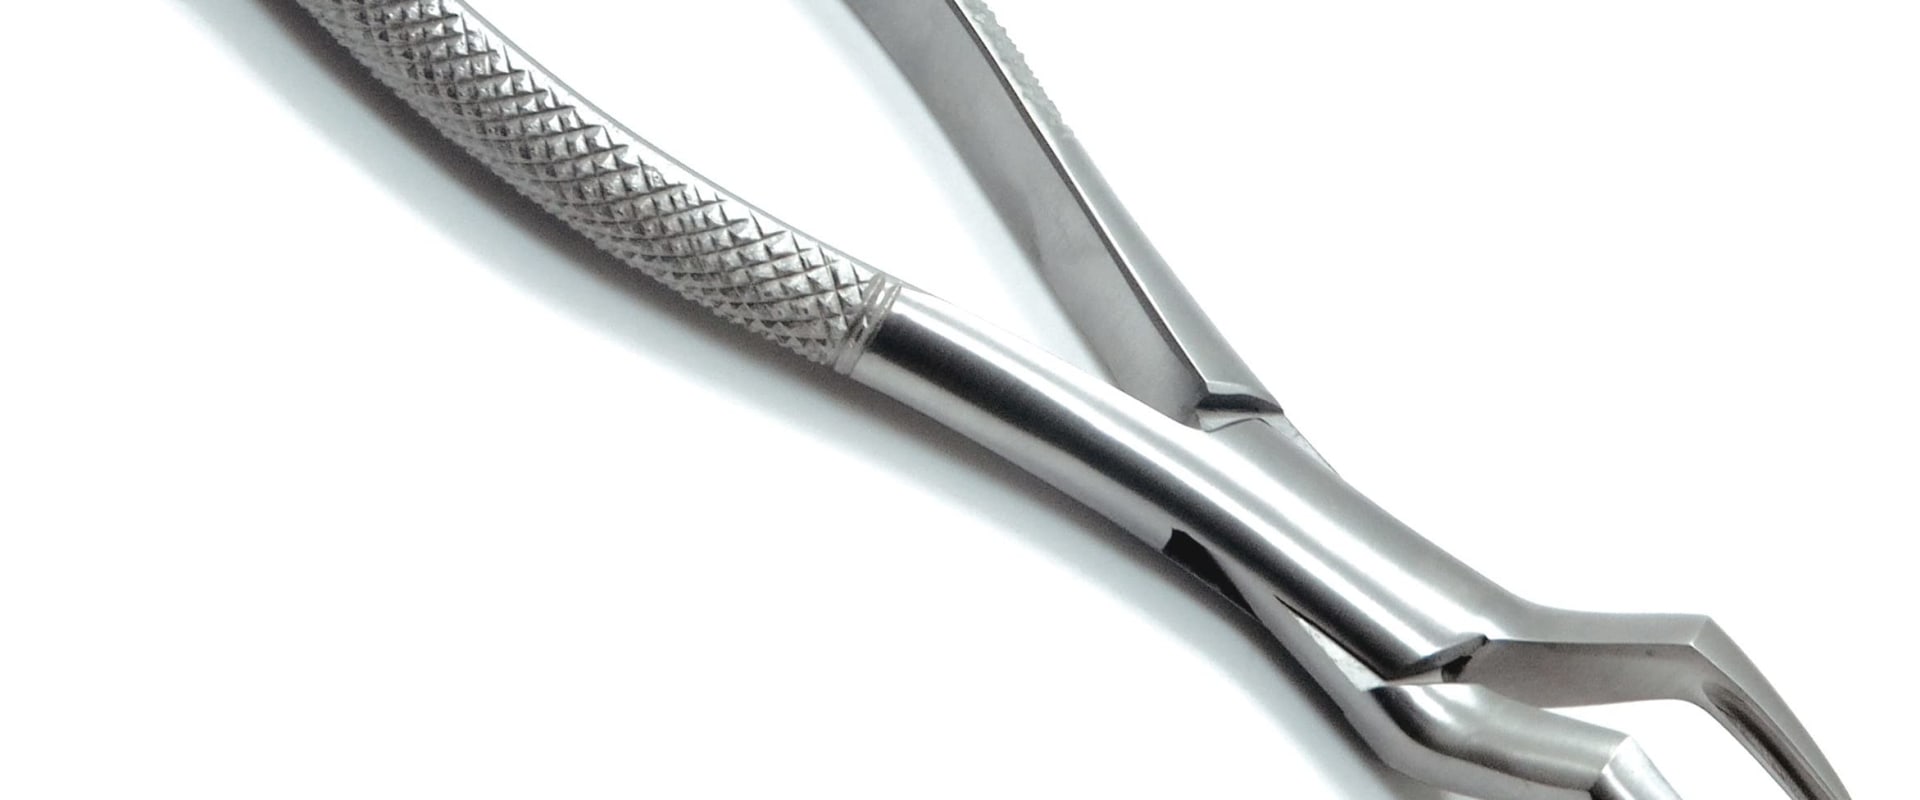 What is a Dental Forceps and How to Use It